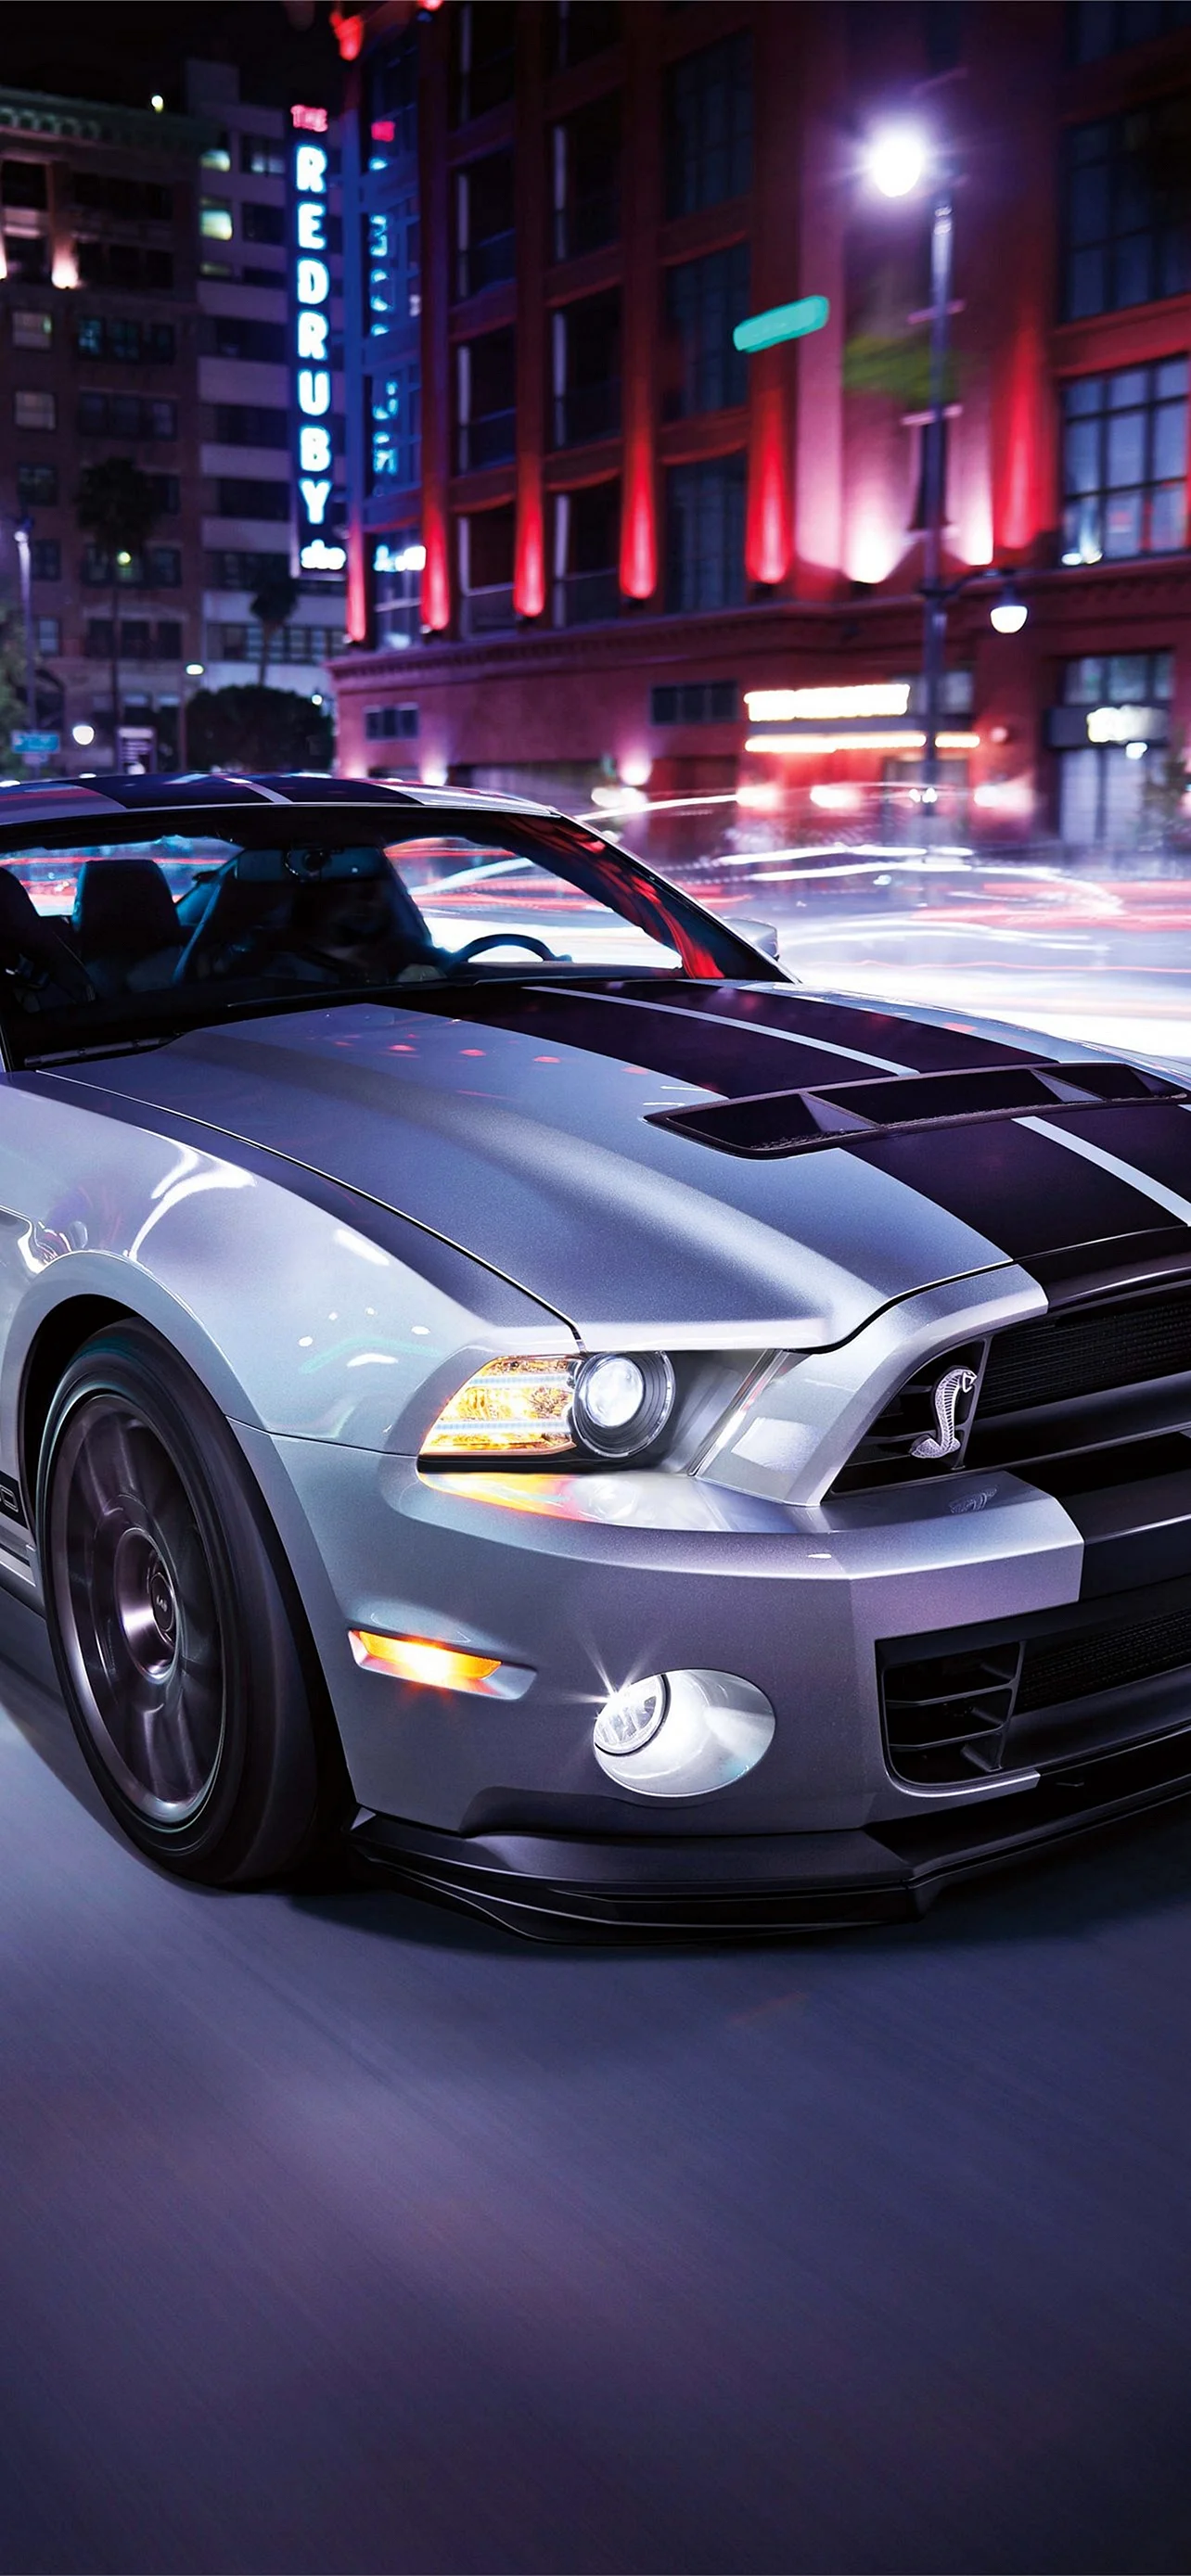 Ford Shelby Gt500 Wallpaper for iPhone 13 Pro Max